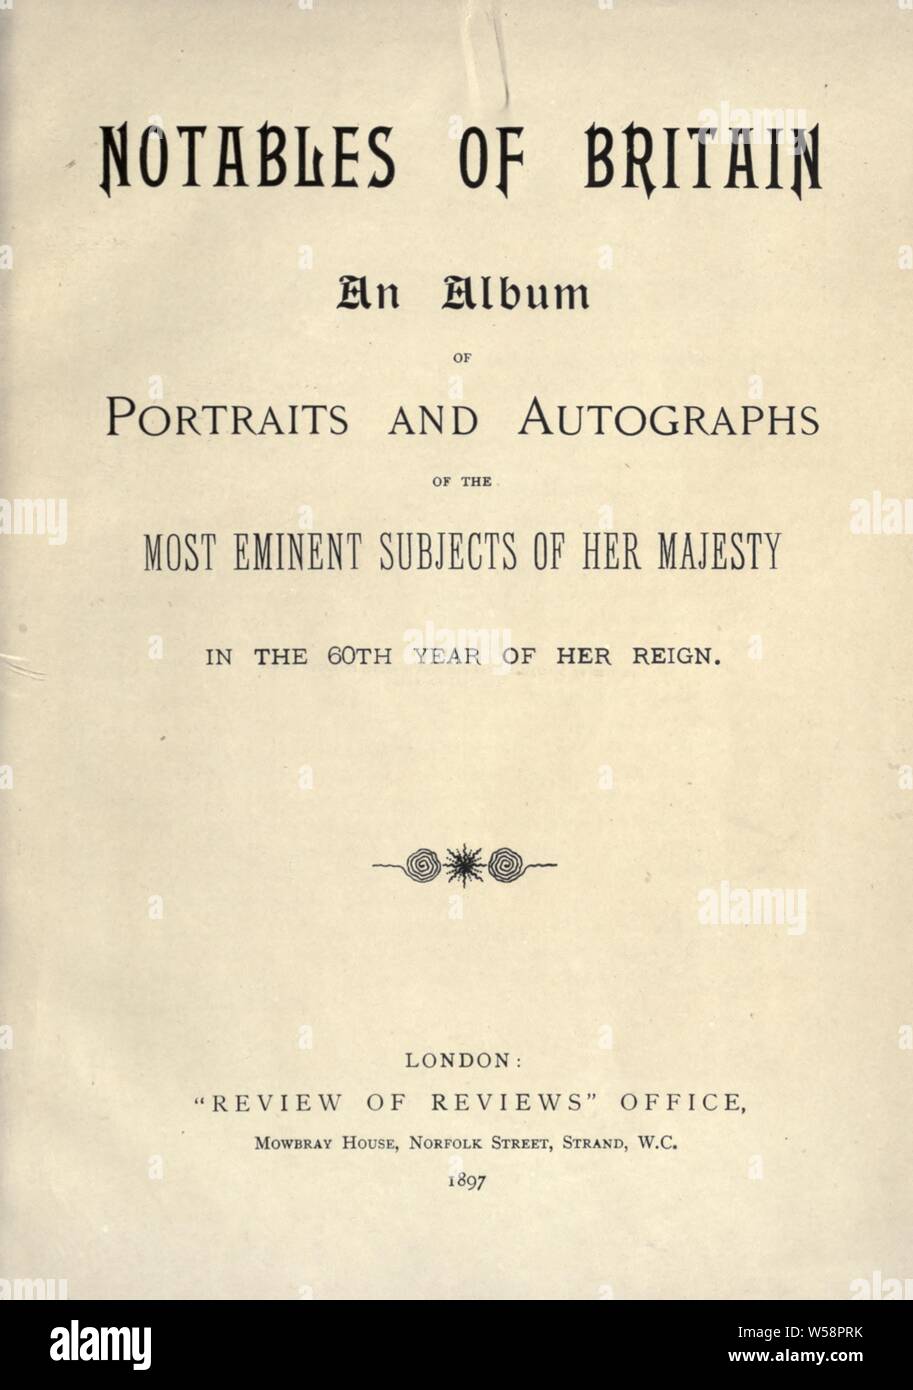 Notables of Britain; an album of portraits and autographs of the most eminent subjects of Her Majesty in the 60th year of her reign Stock Photo